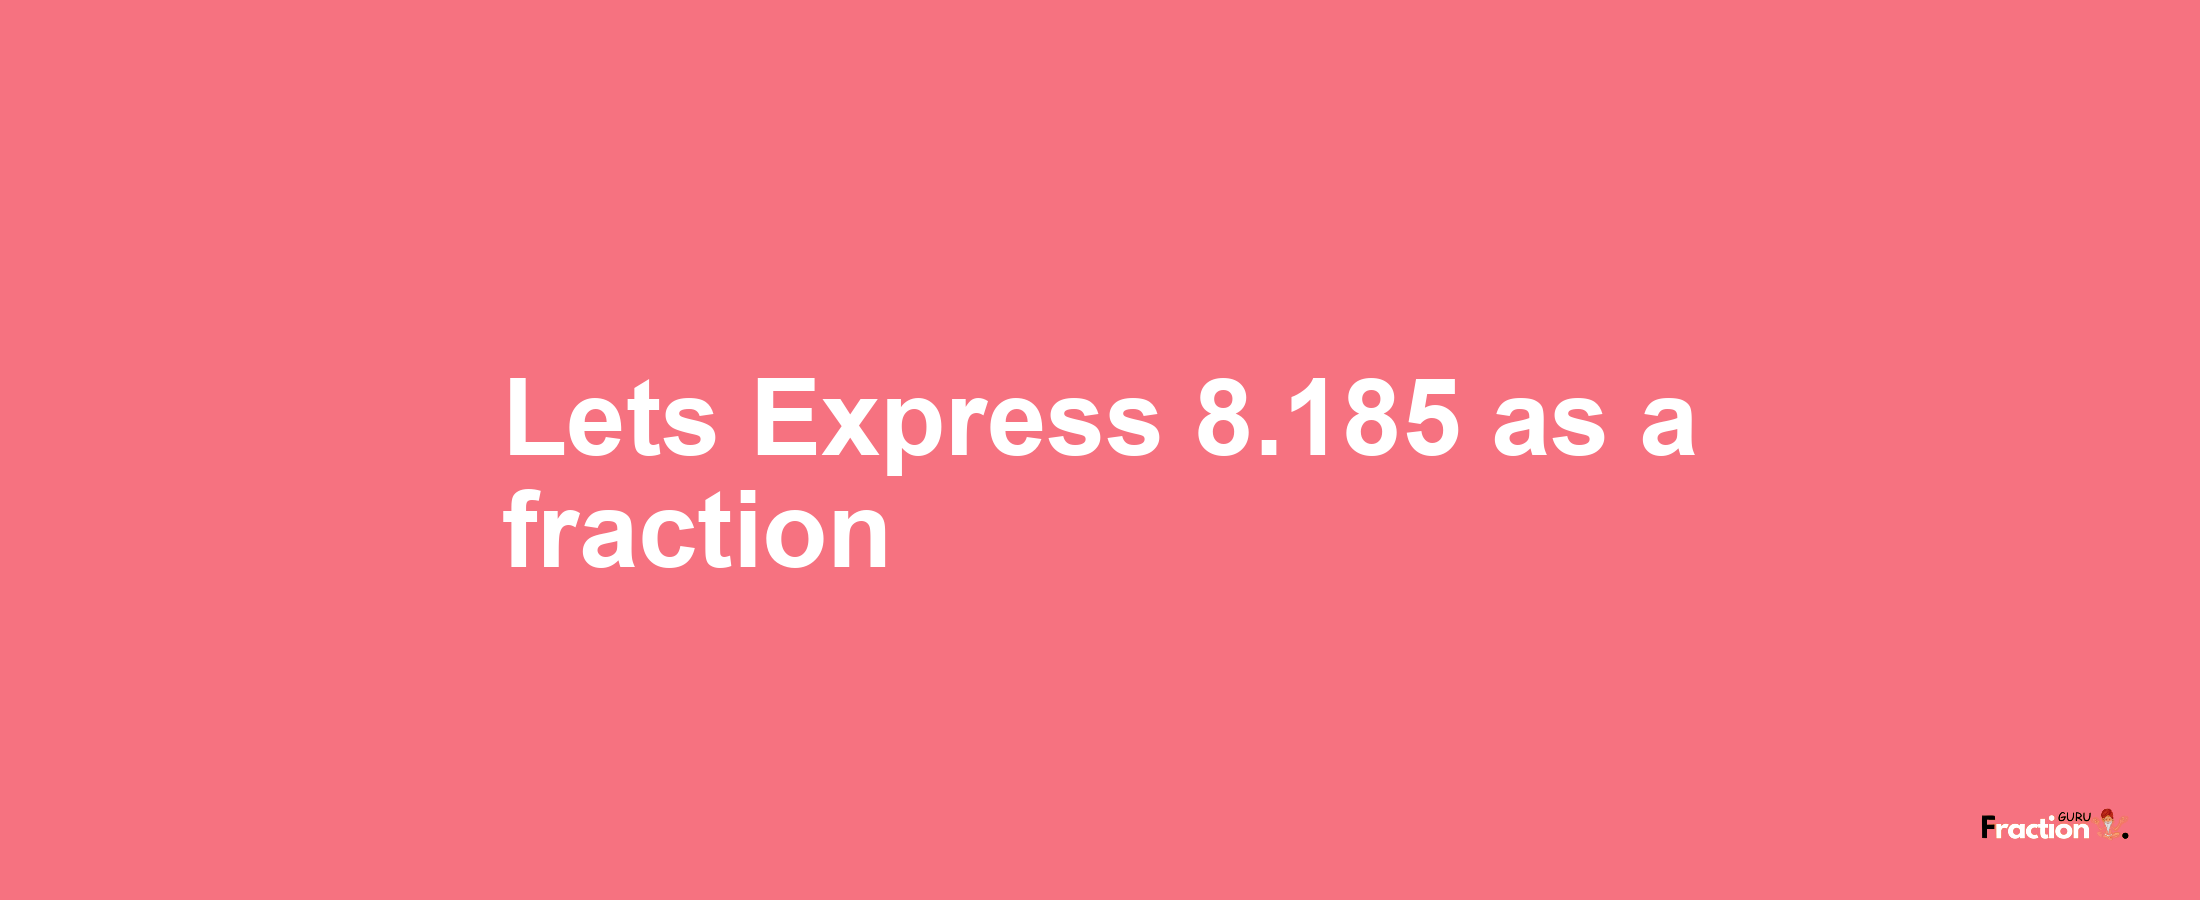 Lets Express 8.185 as afraction